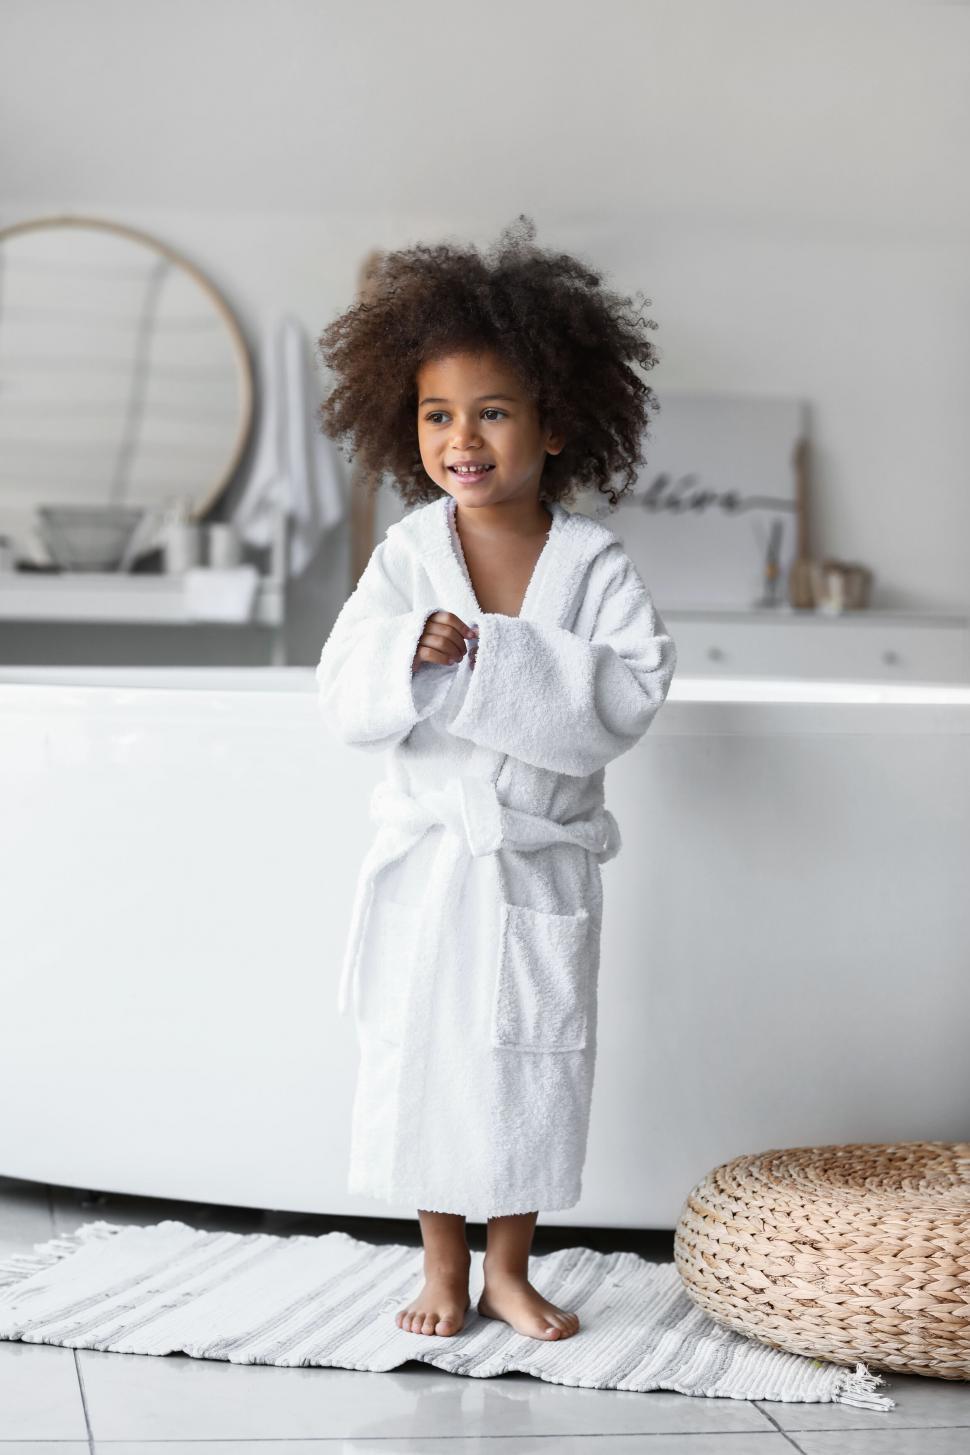 Free Image of Smiling child in white bathrobe standing 